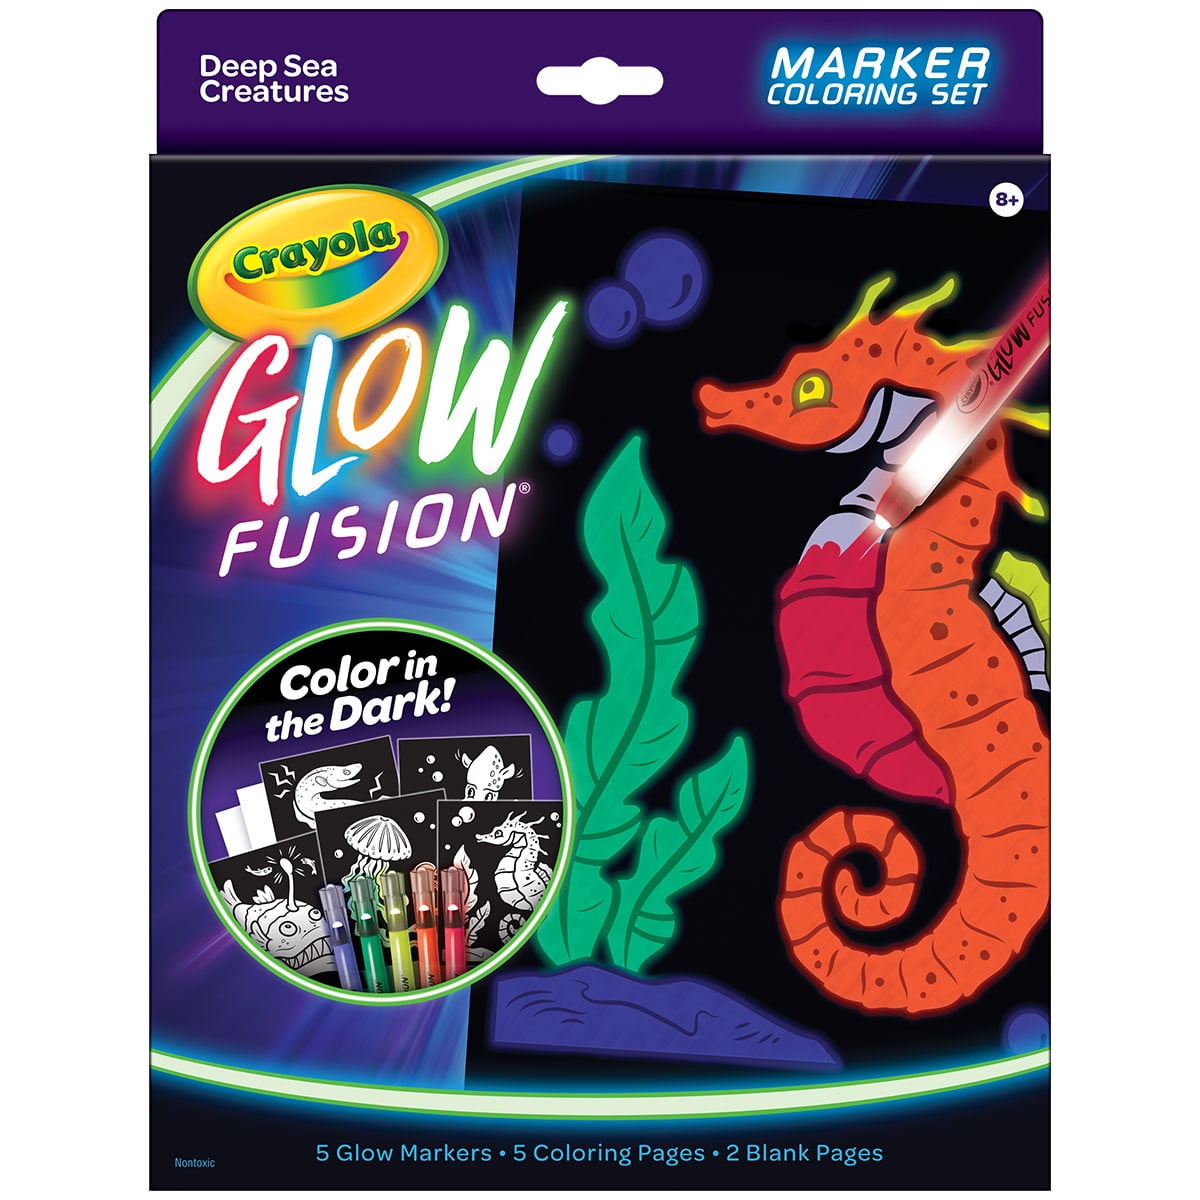 Crayola Glow in the Dark Coloring Set with Markers, Sea Creatures, Gifts for Kids, Ages 8+